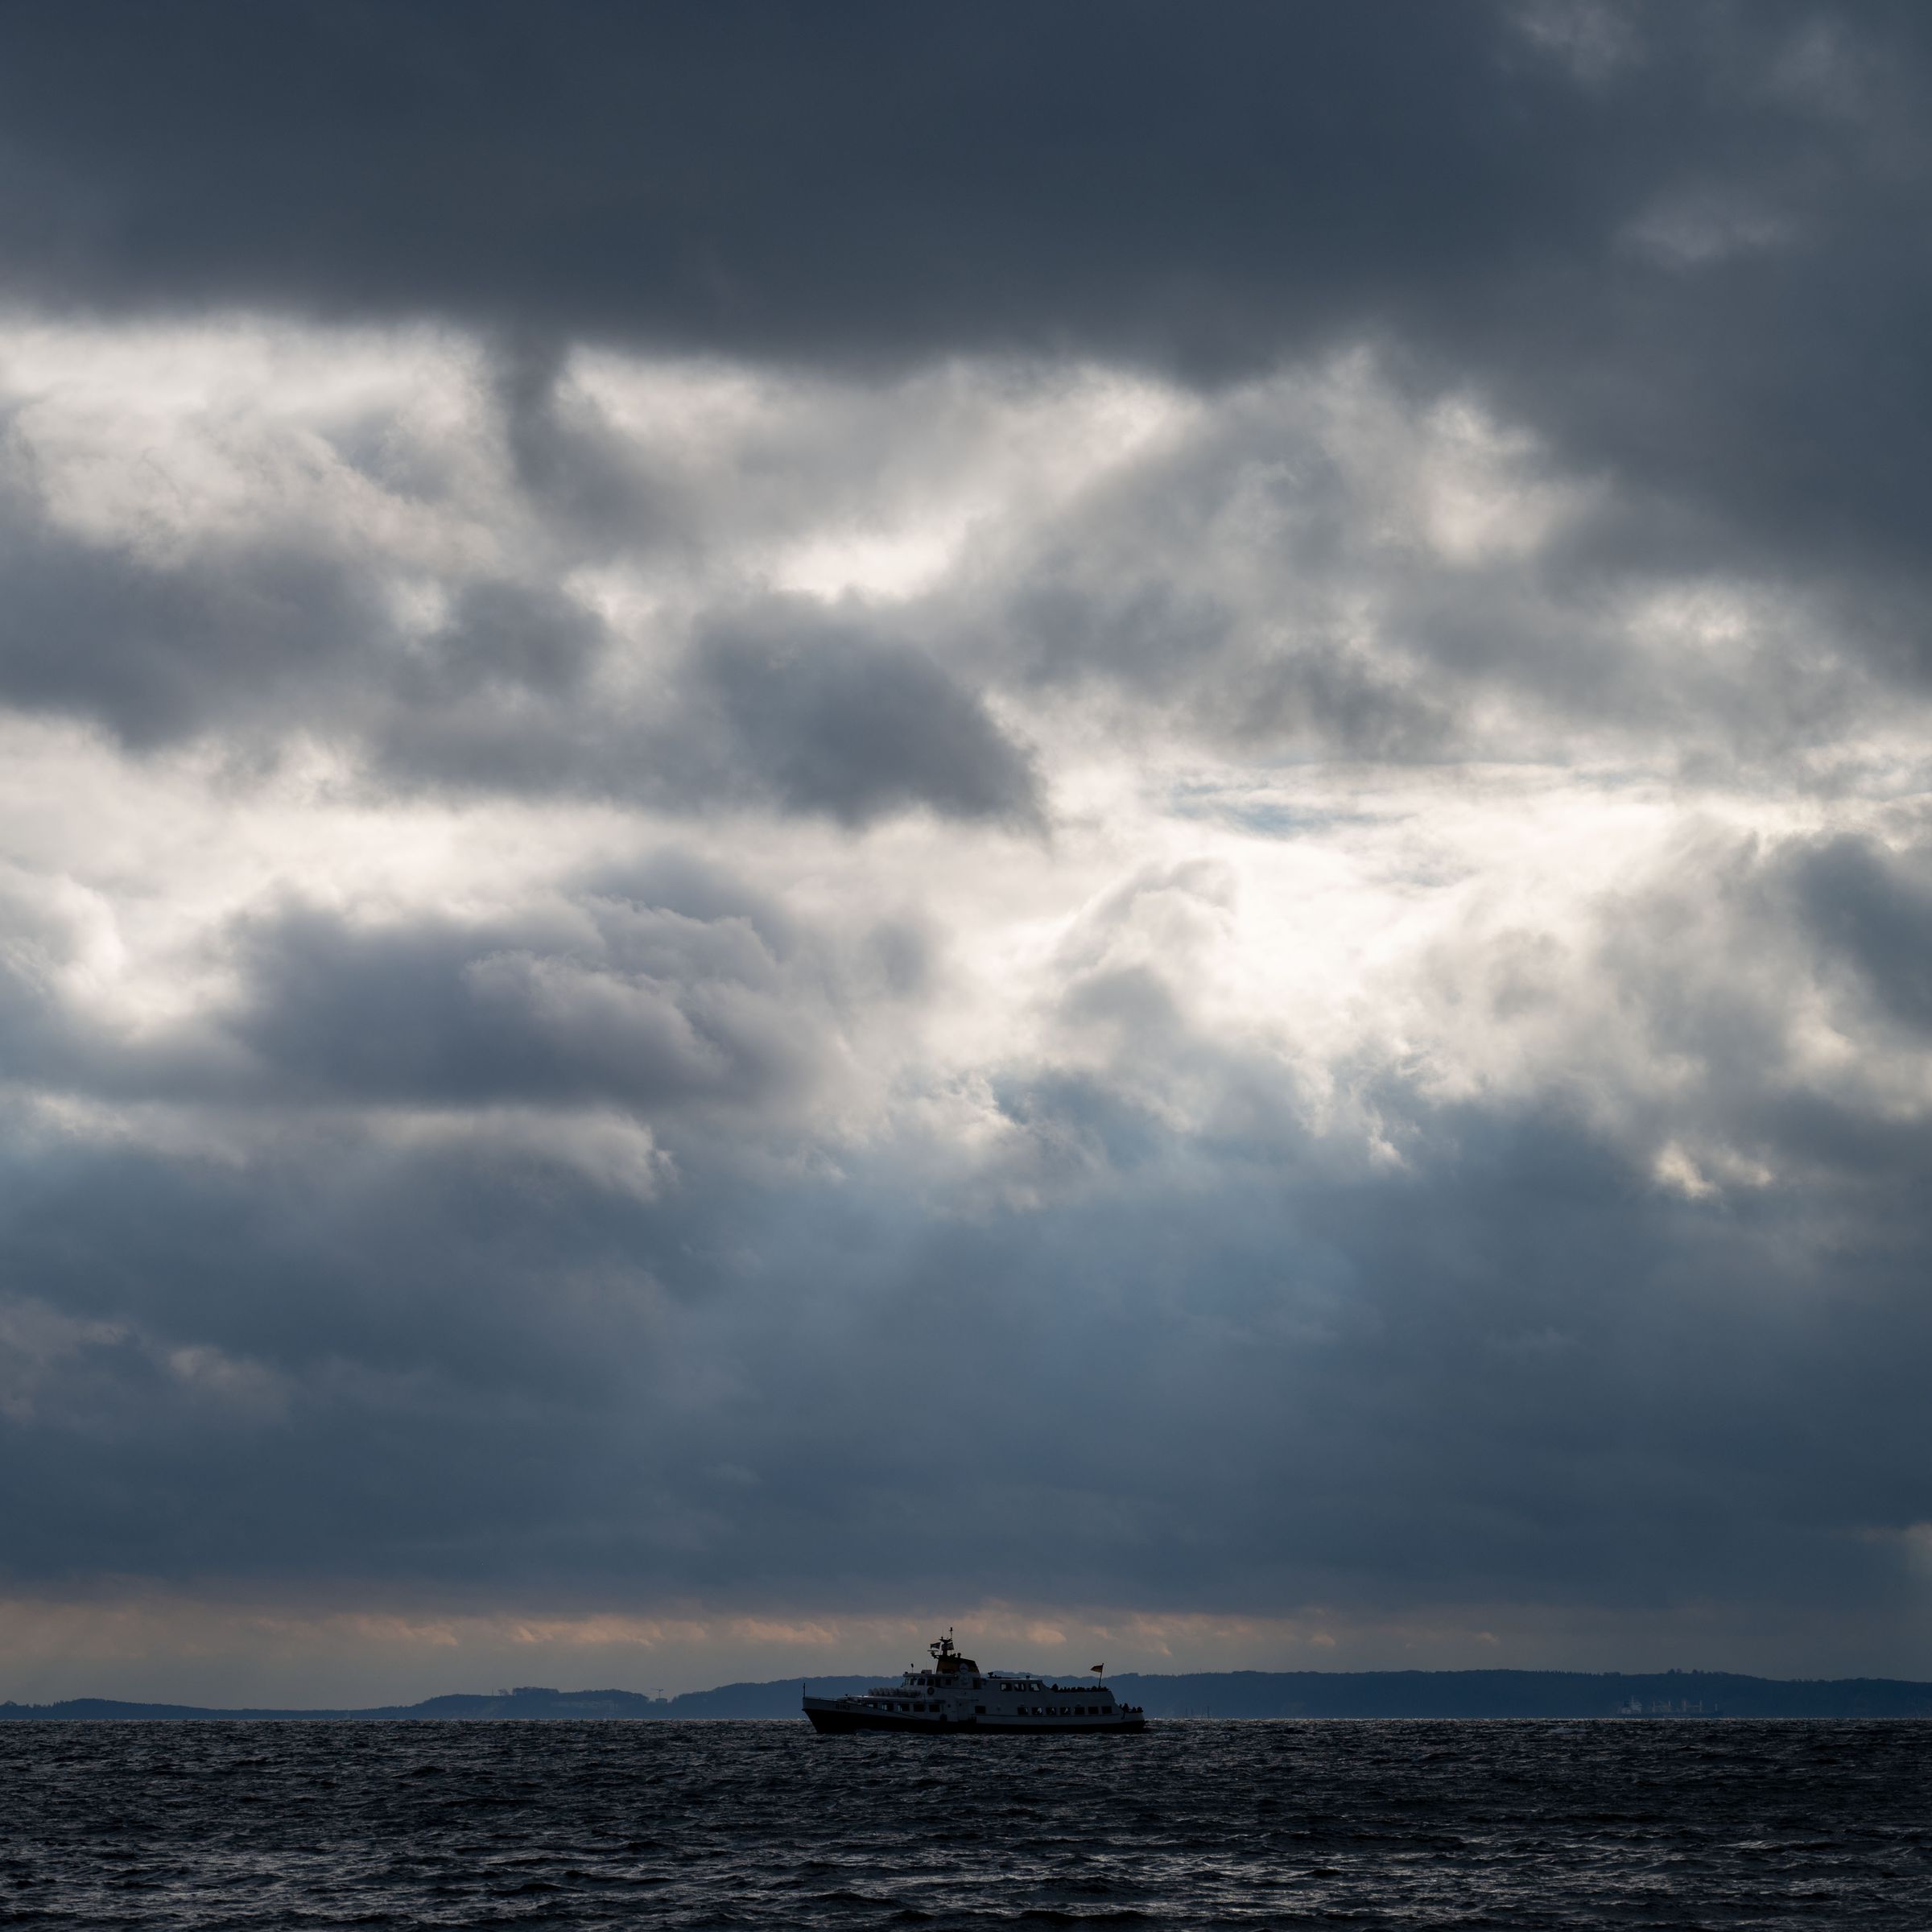 A ship on the sea is seen in the center of the photo. Above it, rays of sunlight pierce through gaps in thick clouds.